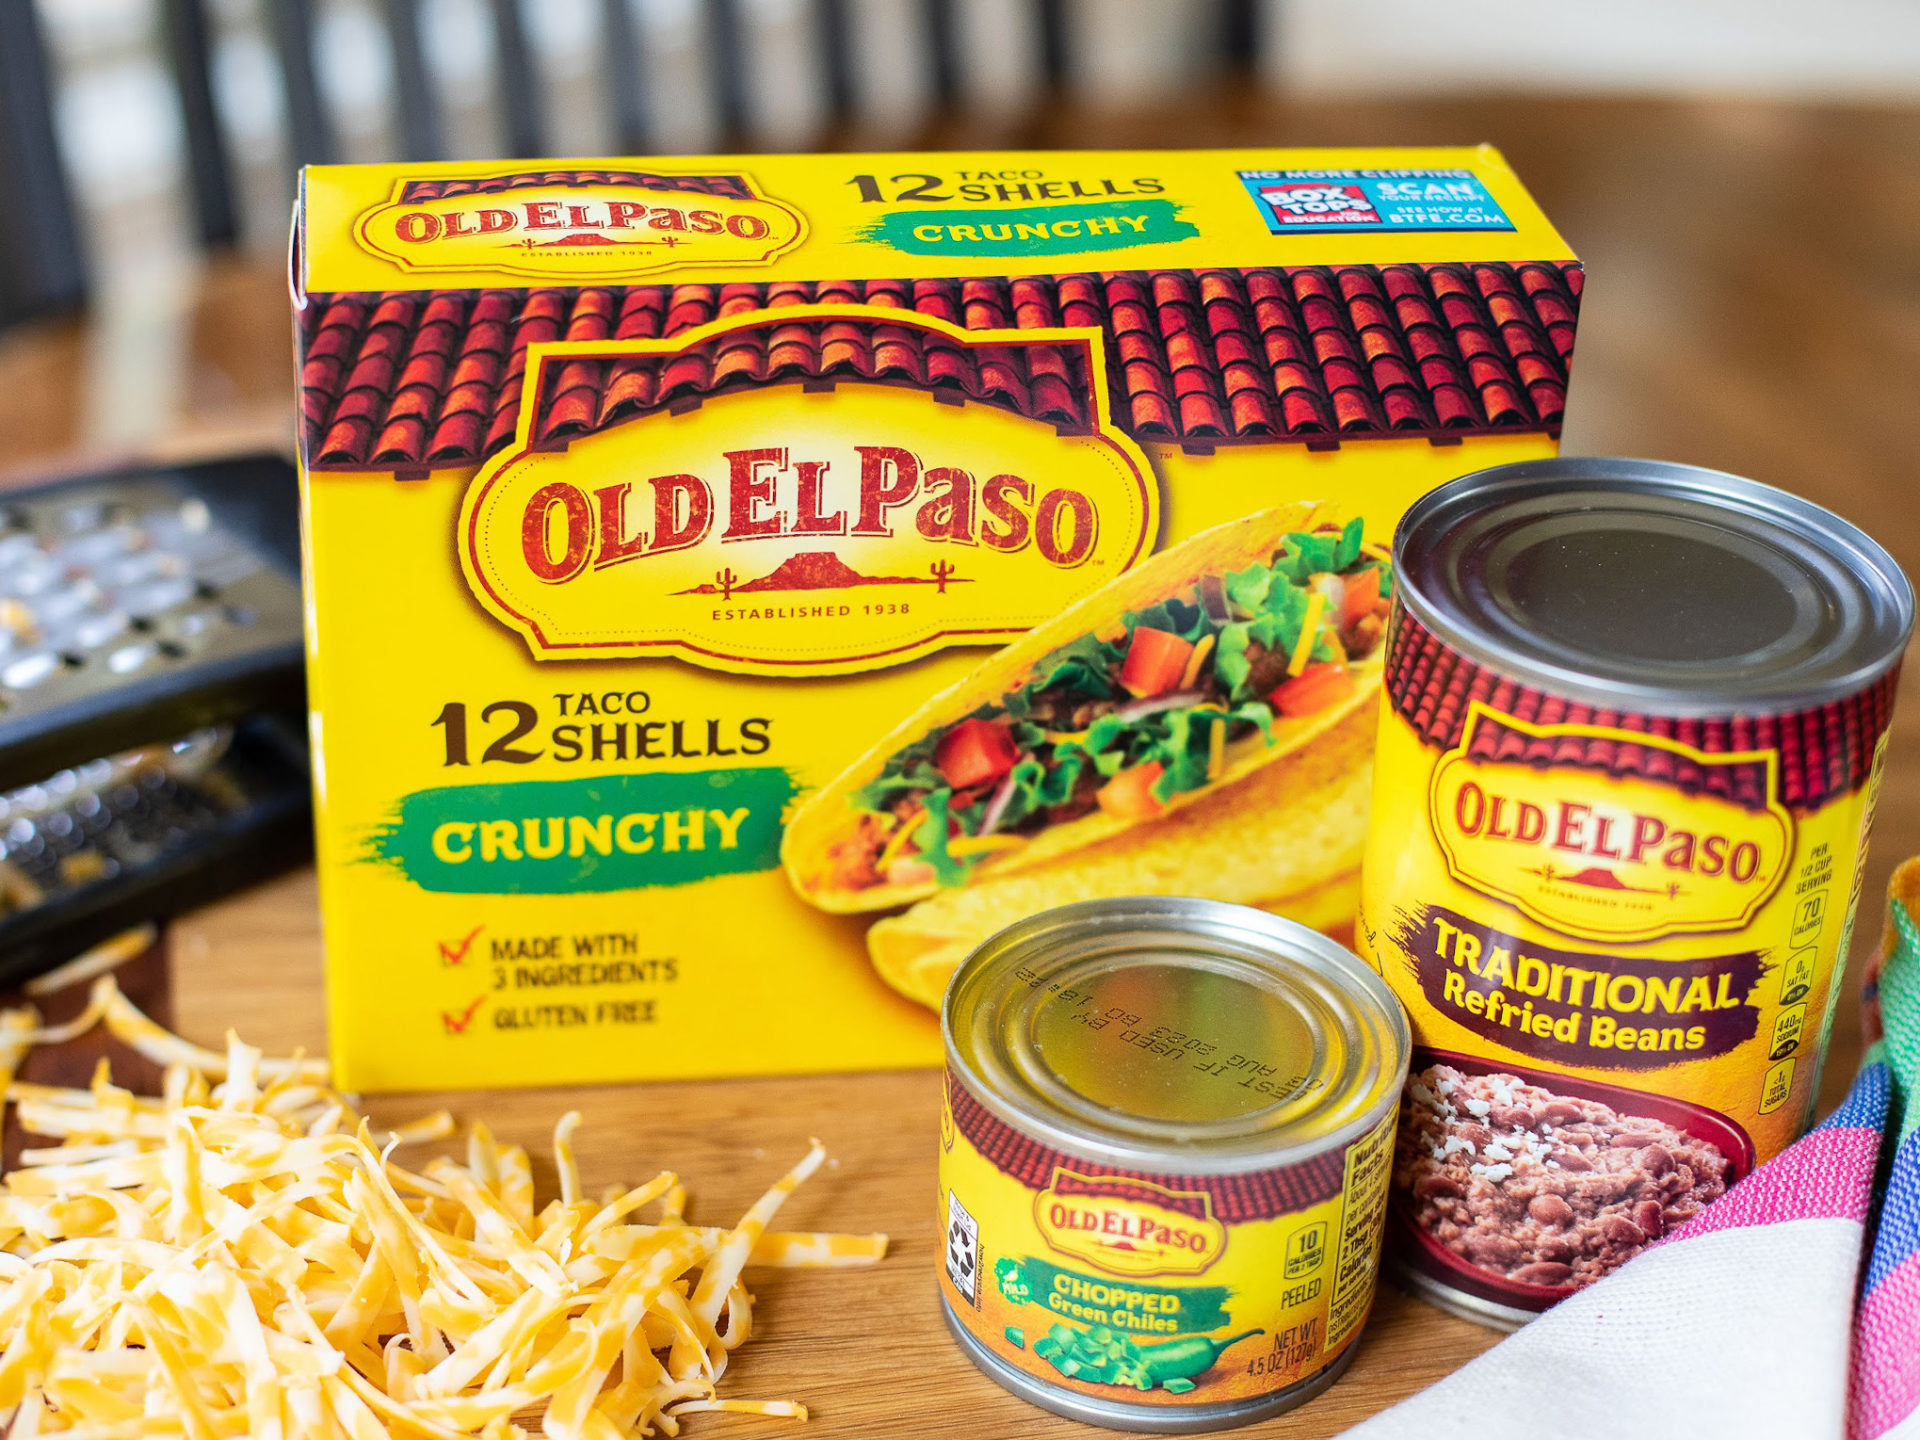 Do Taco Tuesday On The Cheap With Great Deals On Old El Paso Products At Kroger